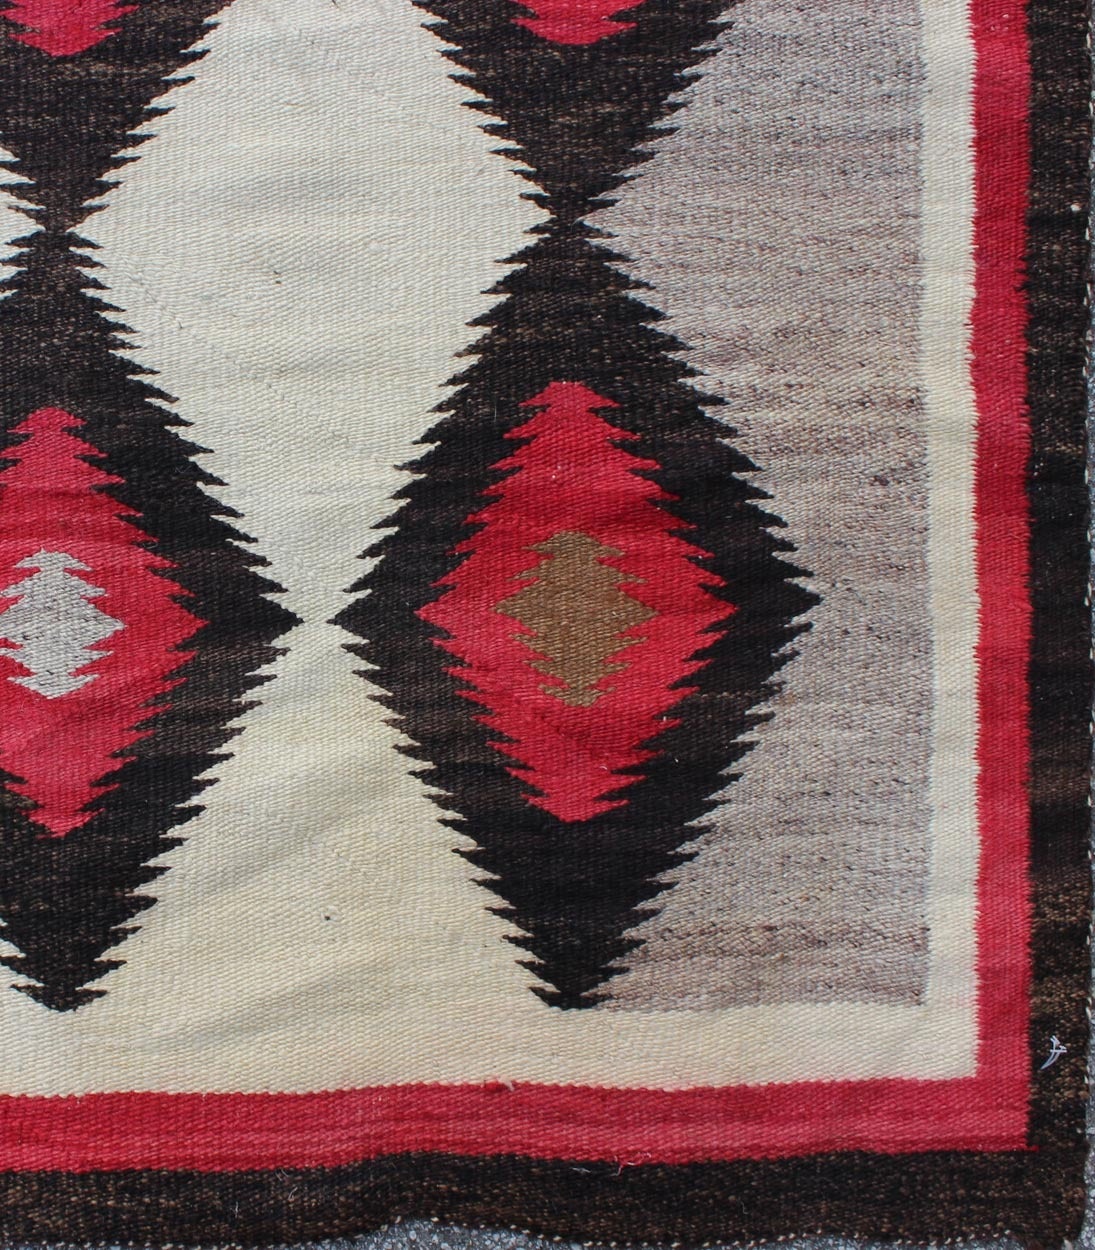 This intriguing vintage Navajo rug was woven in the United States during the first half of the 20th Century. The exciting and unique composition boasts a captivating geometric composition with an all-over diamond design. The range of colors includes